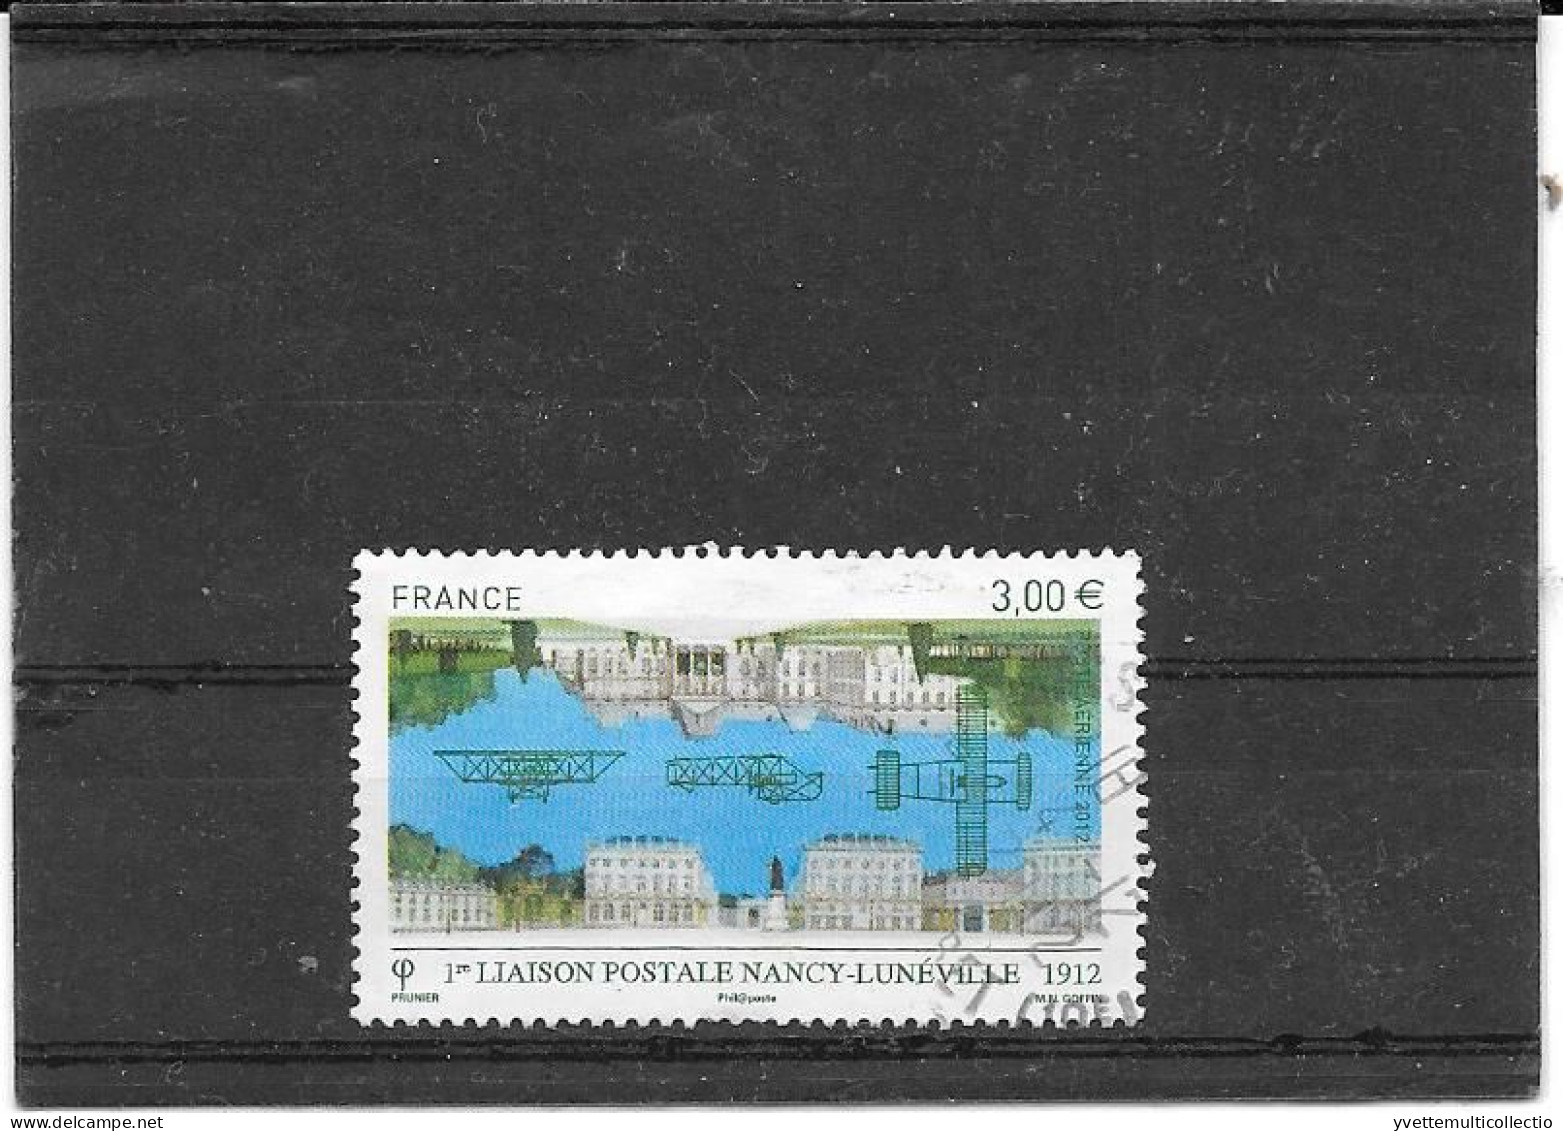 FRANCE 2012  1er LIAISON POSTALE NANCY-LUNEVILLE TIMBRE GOMME CACHET ROND PA. N° 75 - 1960-.... Used